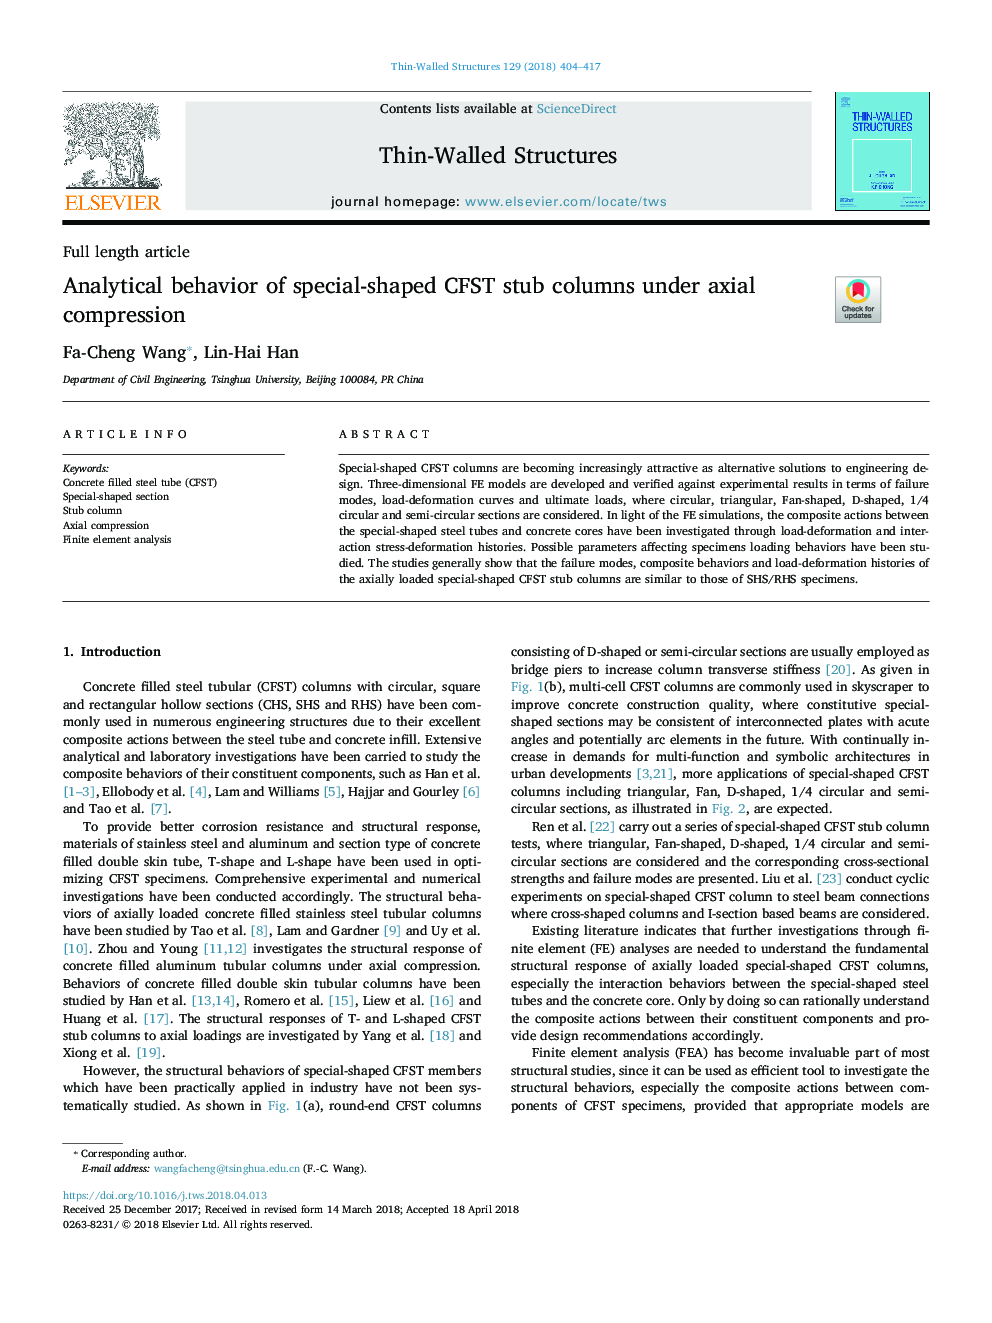 Analytical behavior of special-shaped CFST stub columns under axial compression